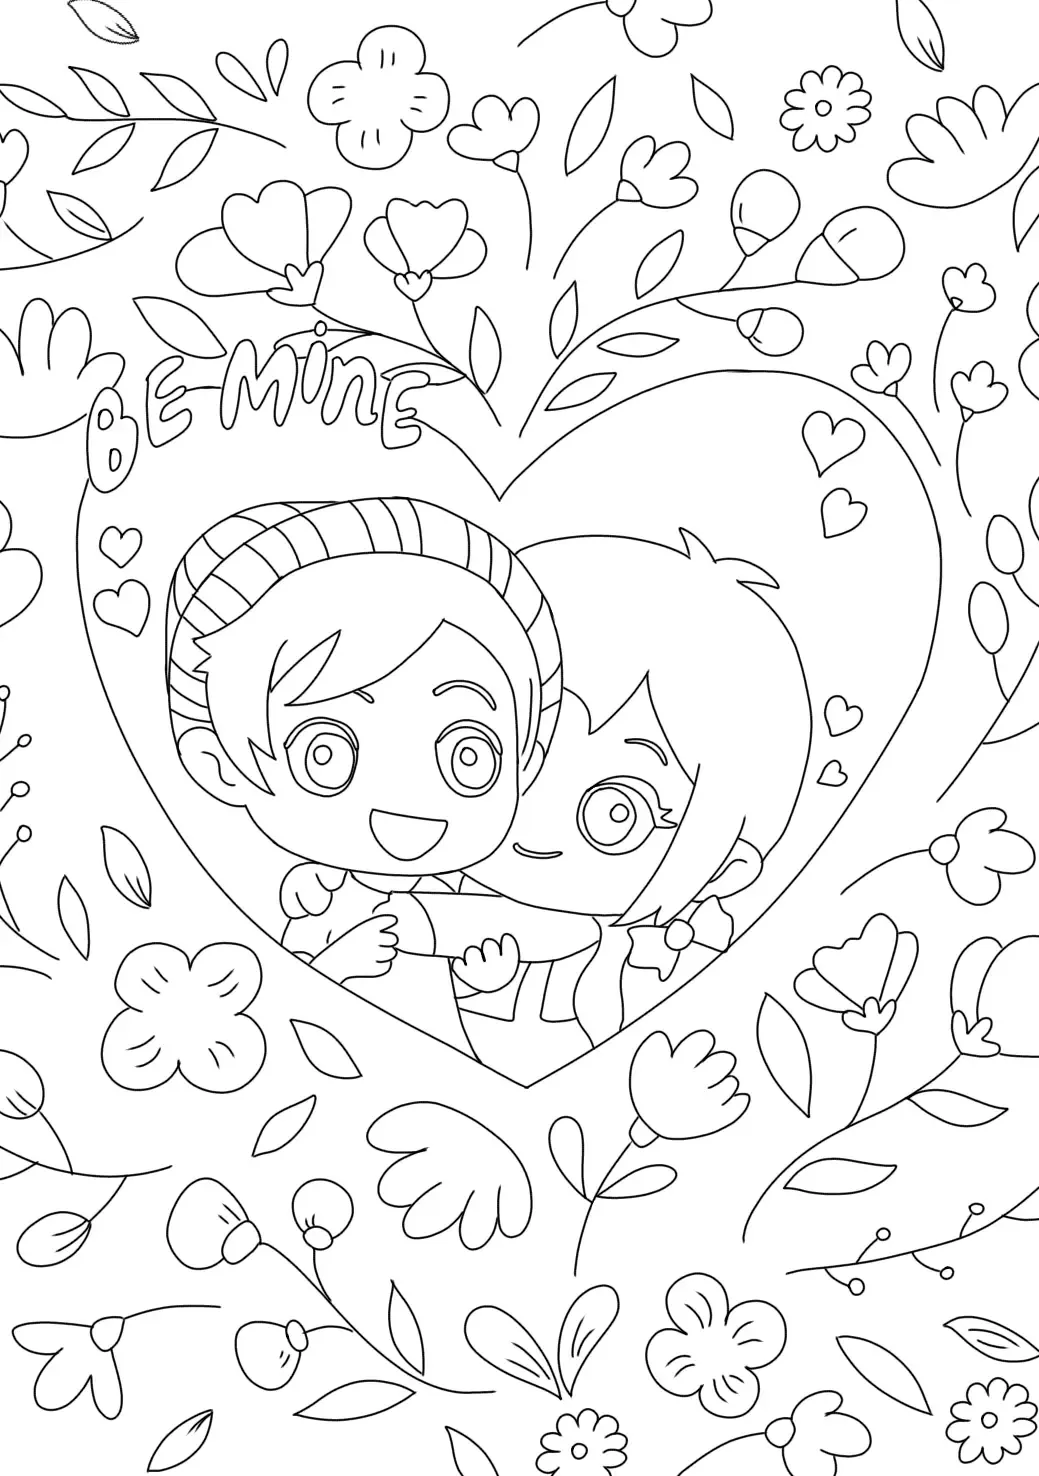 Be mine coloring pages